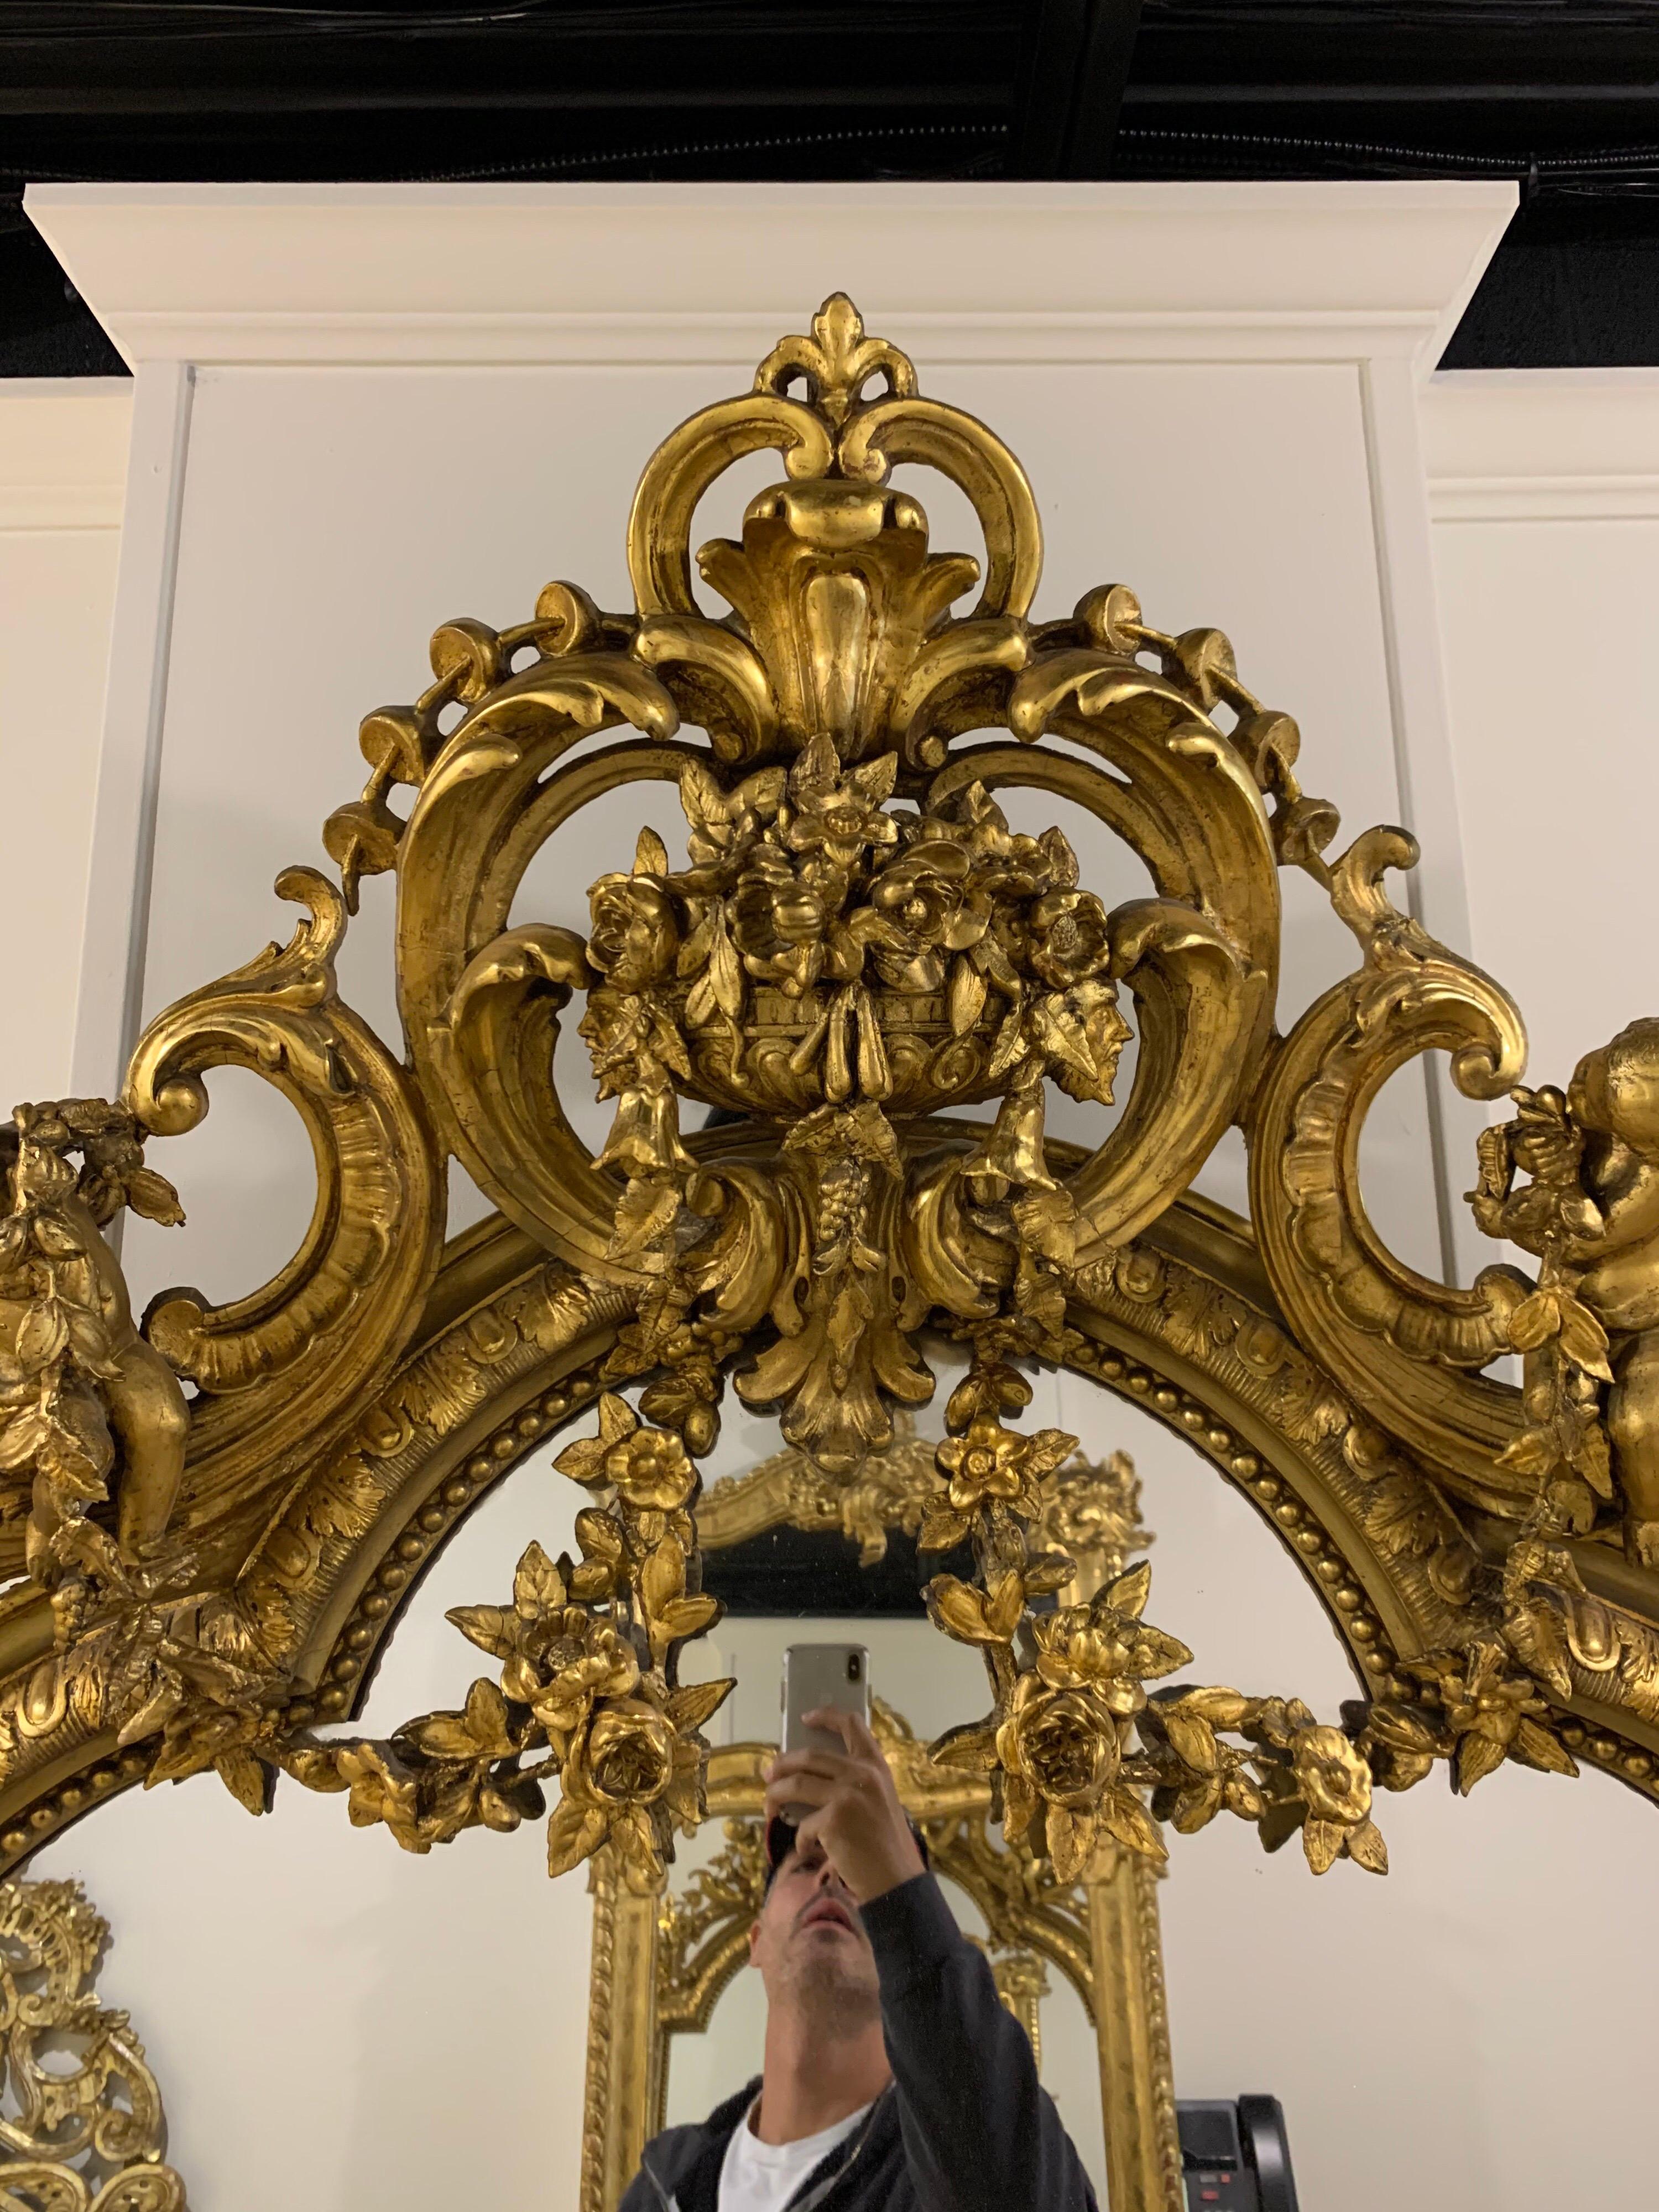 Exceptional 19th century French Louis XVI style carved and giltwood mirror. Amazing floral, images, cherubs and an overflowing urn. Imagine the time and artisanship that went into making this piece. Absolutely stunning! Note: The mirror is cracked